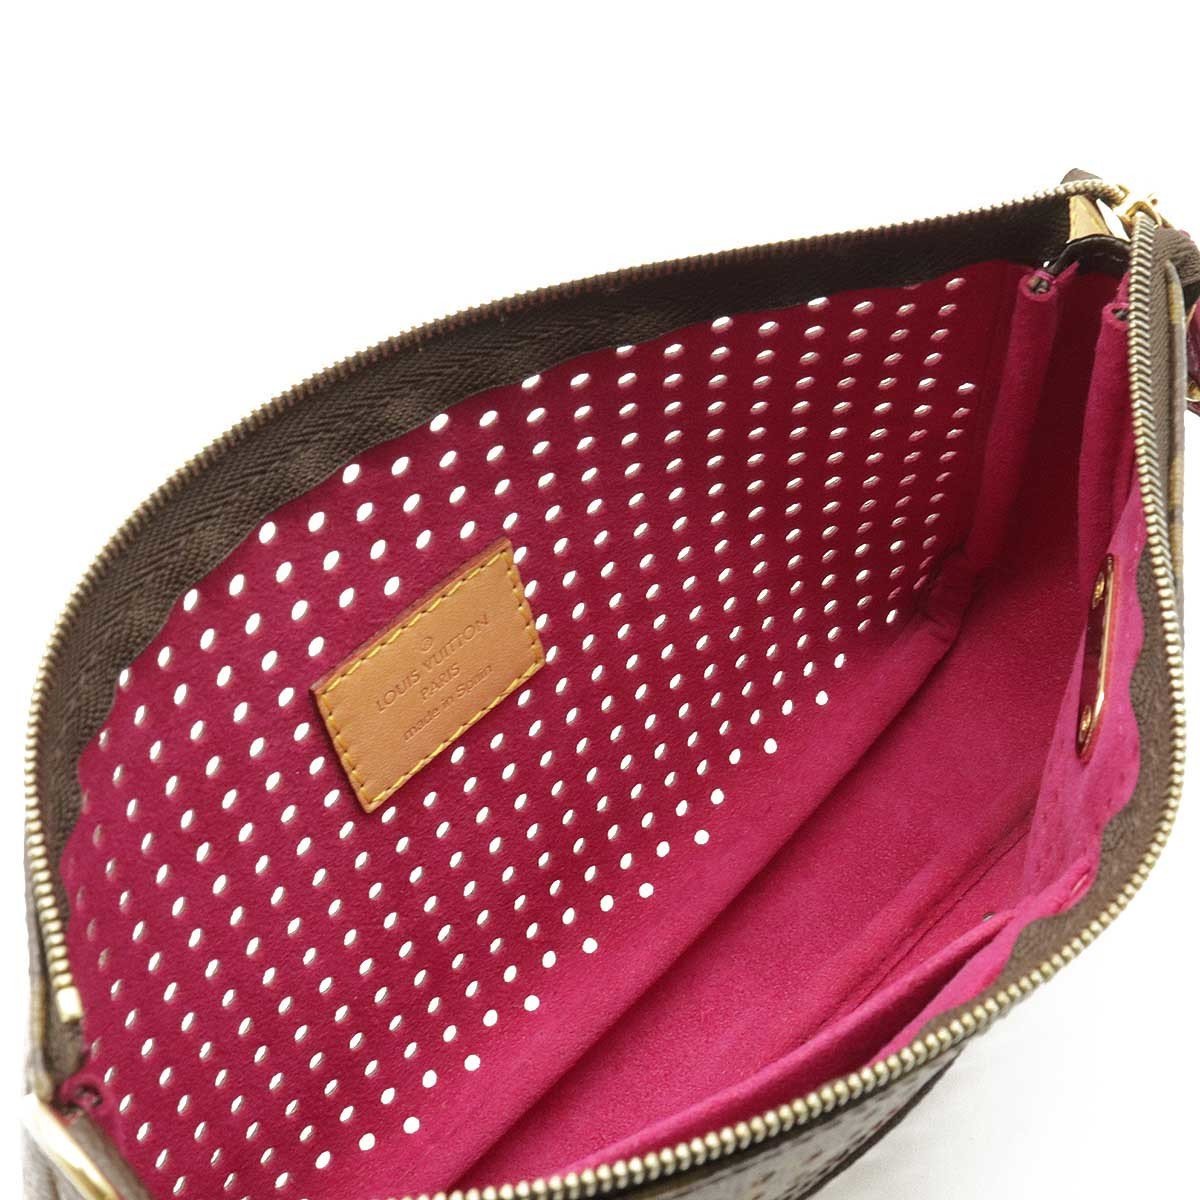 SALE! LOUIS VUITTON Perfo Perforated Pochette Pouch Mini Bag Red